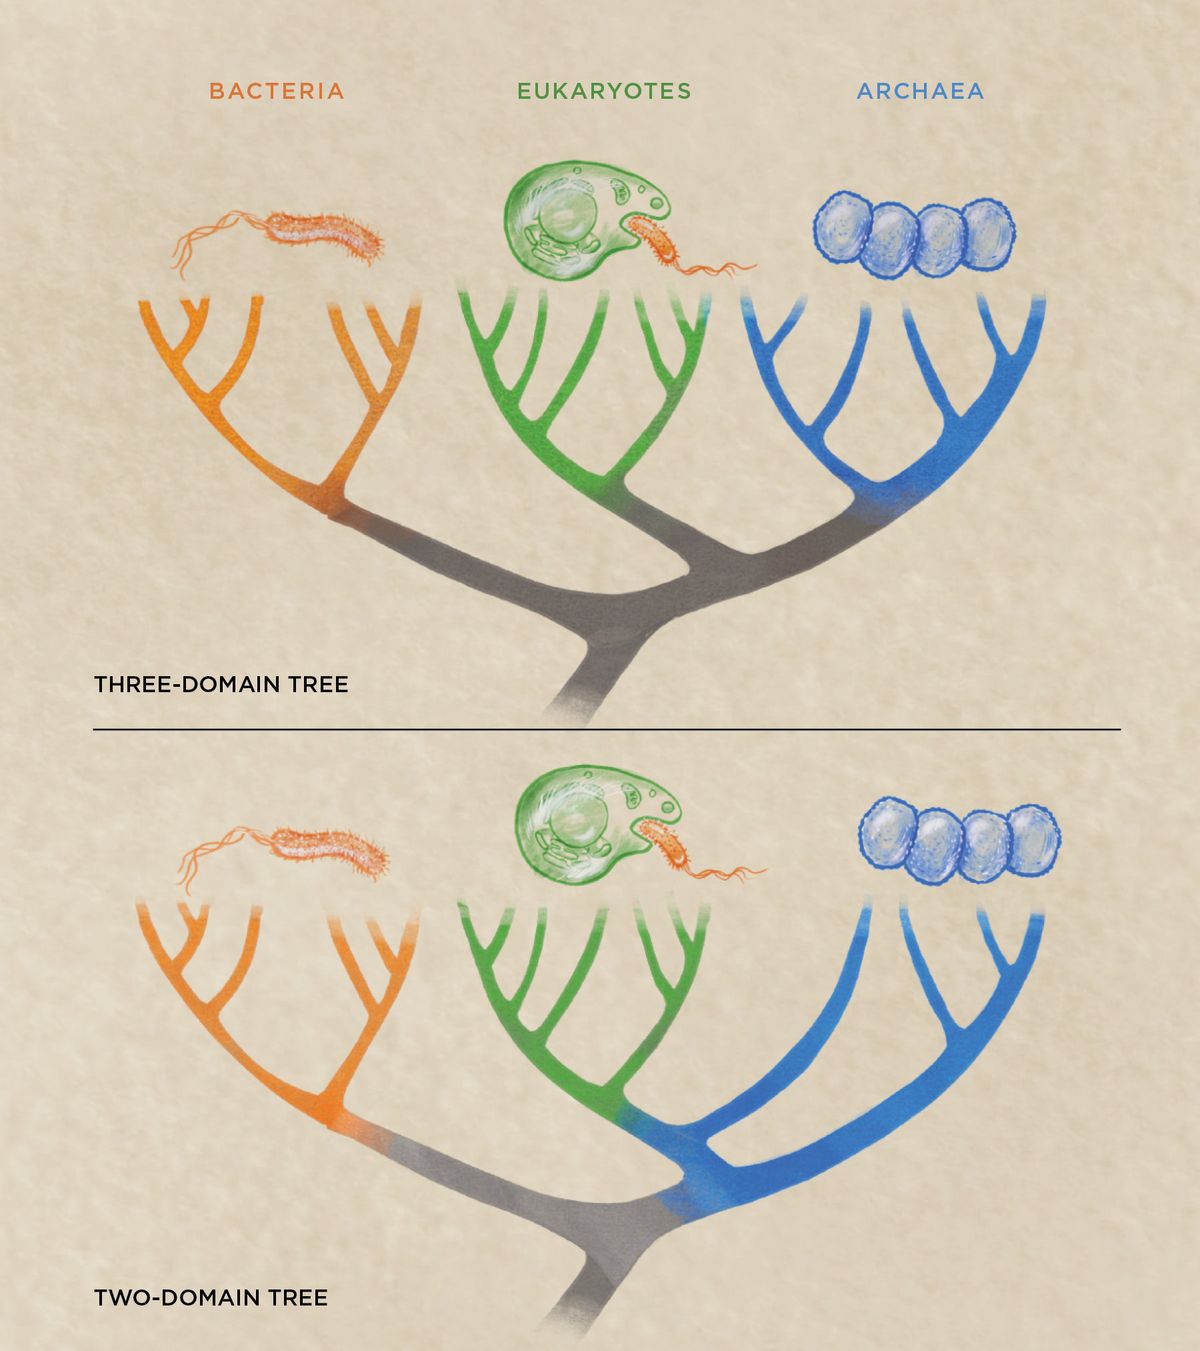 Infographic illustration comparing the three-domain tree and the two-domain tree